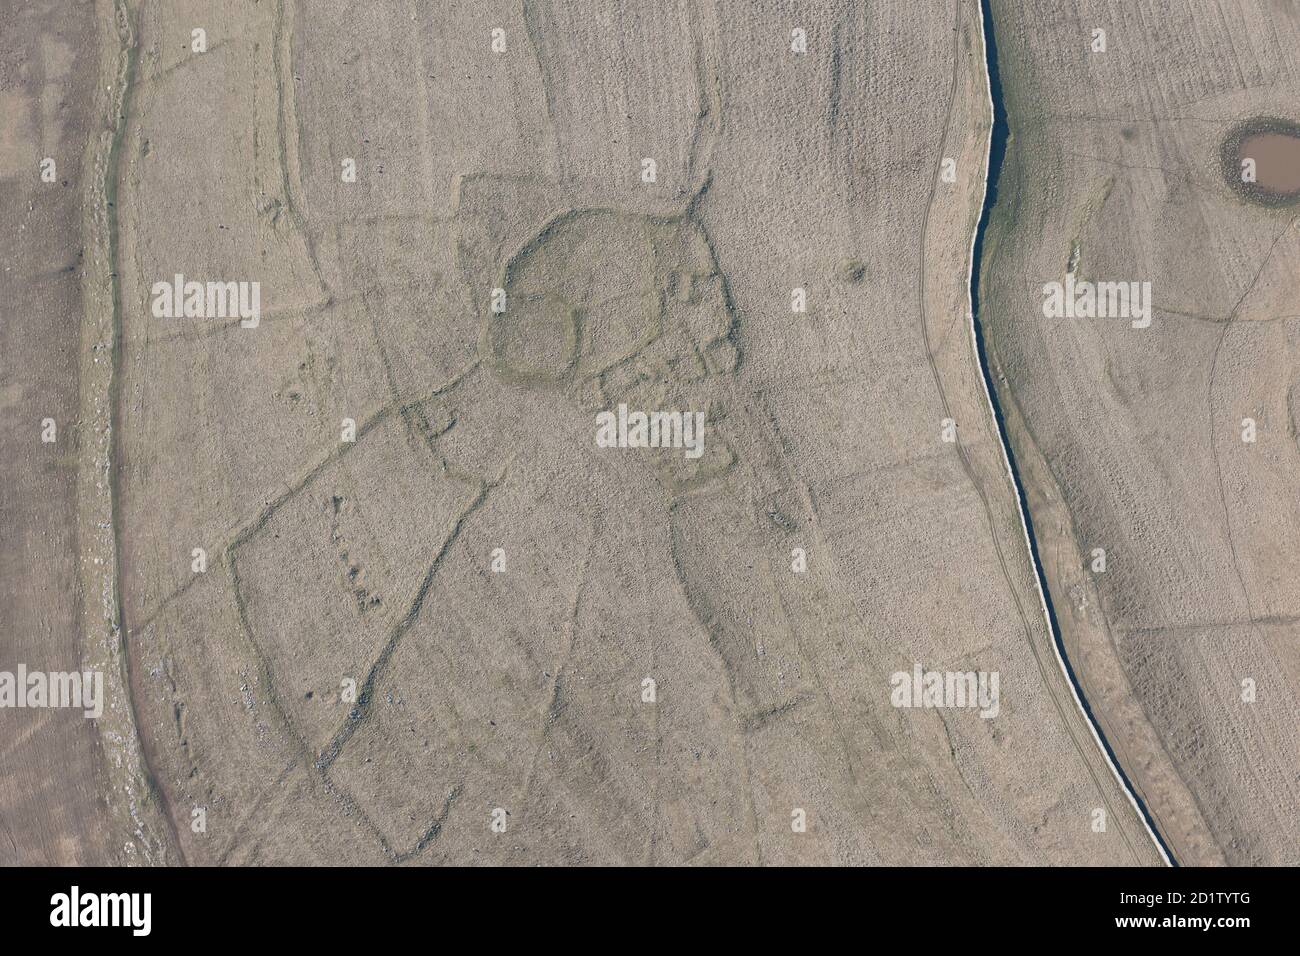 A Romano British enclosed settlement earthwork and an aggregate field system at Intake, Crosby Garrett Fell, Cumbria, 2014, UK. Aerial view. Stock Photo